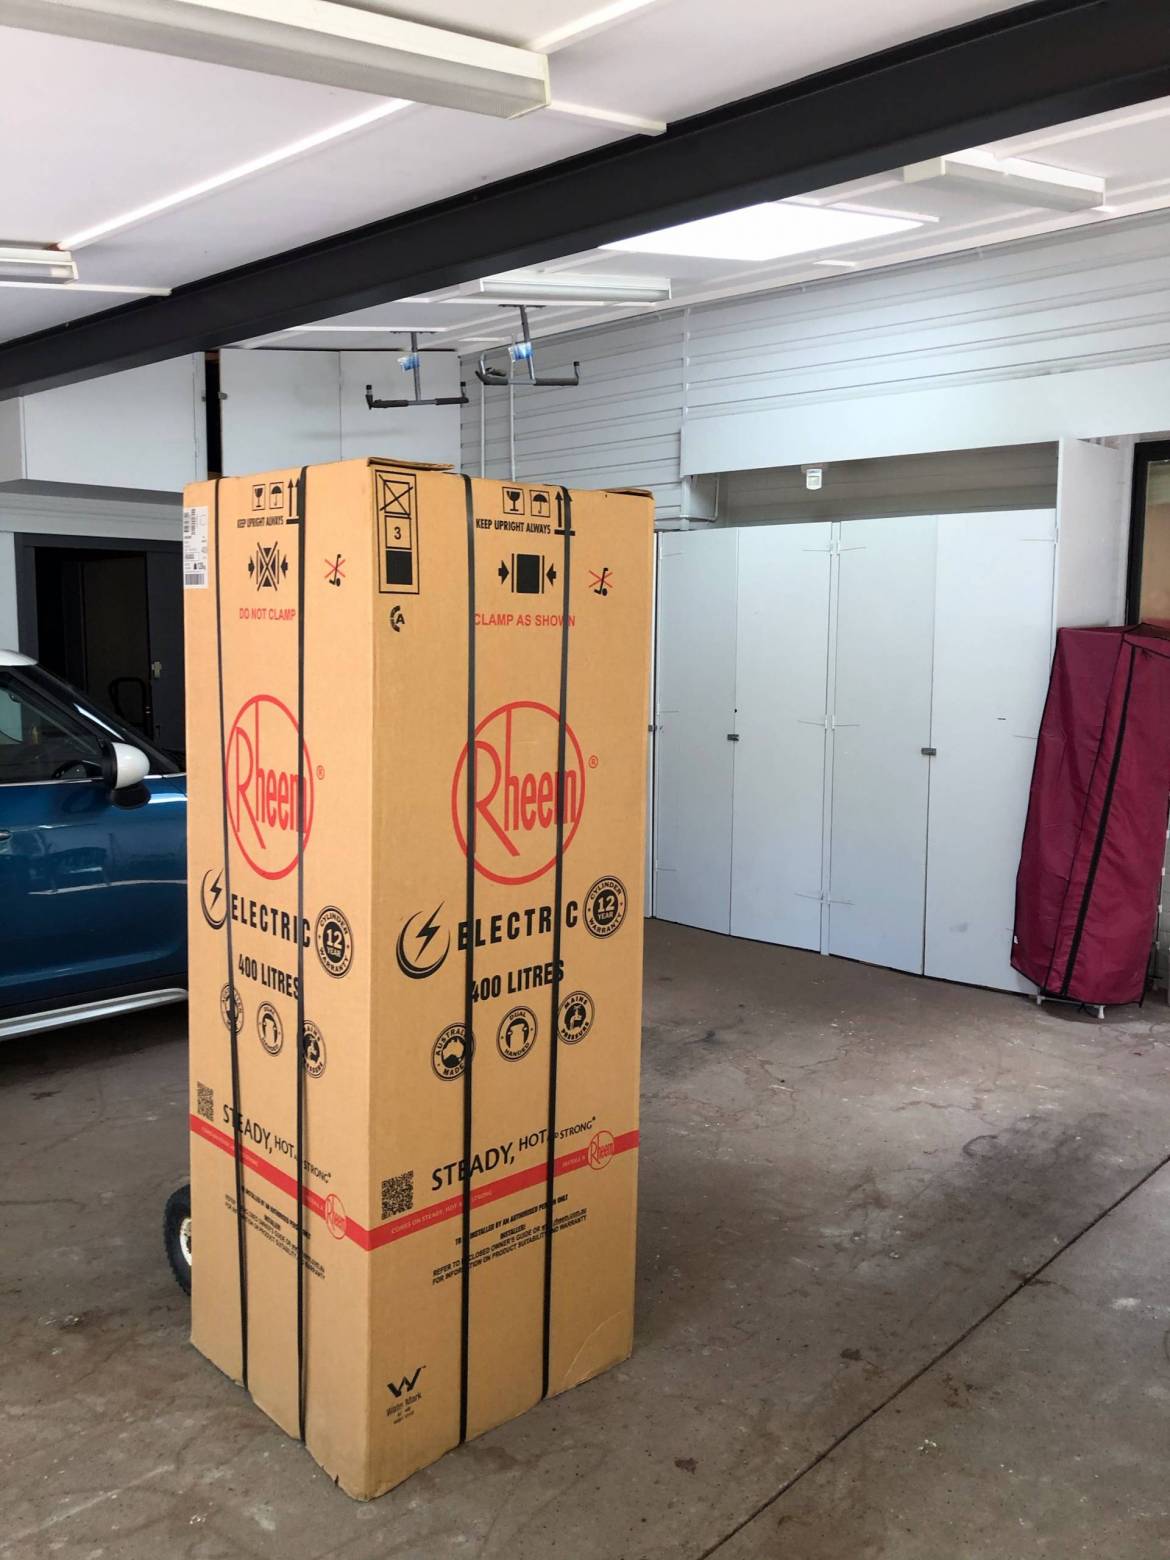 15.3.21-Rheem-twin-element-400ltr-electric-hot-water-system-in-box-492400-scaled.jpg